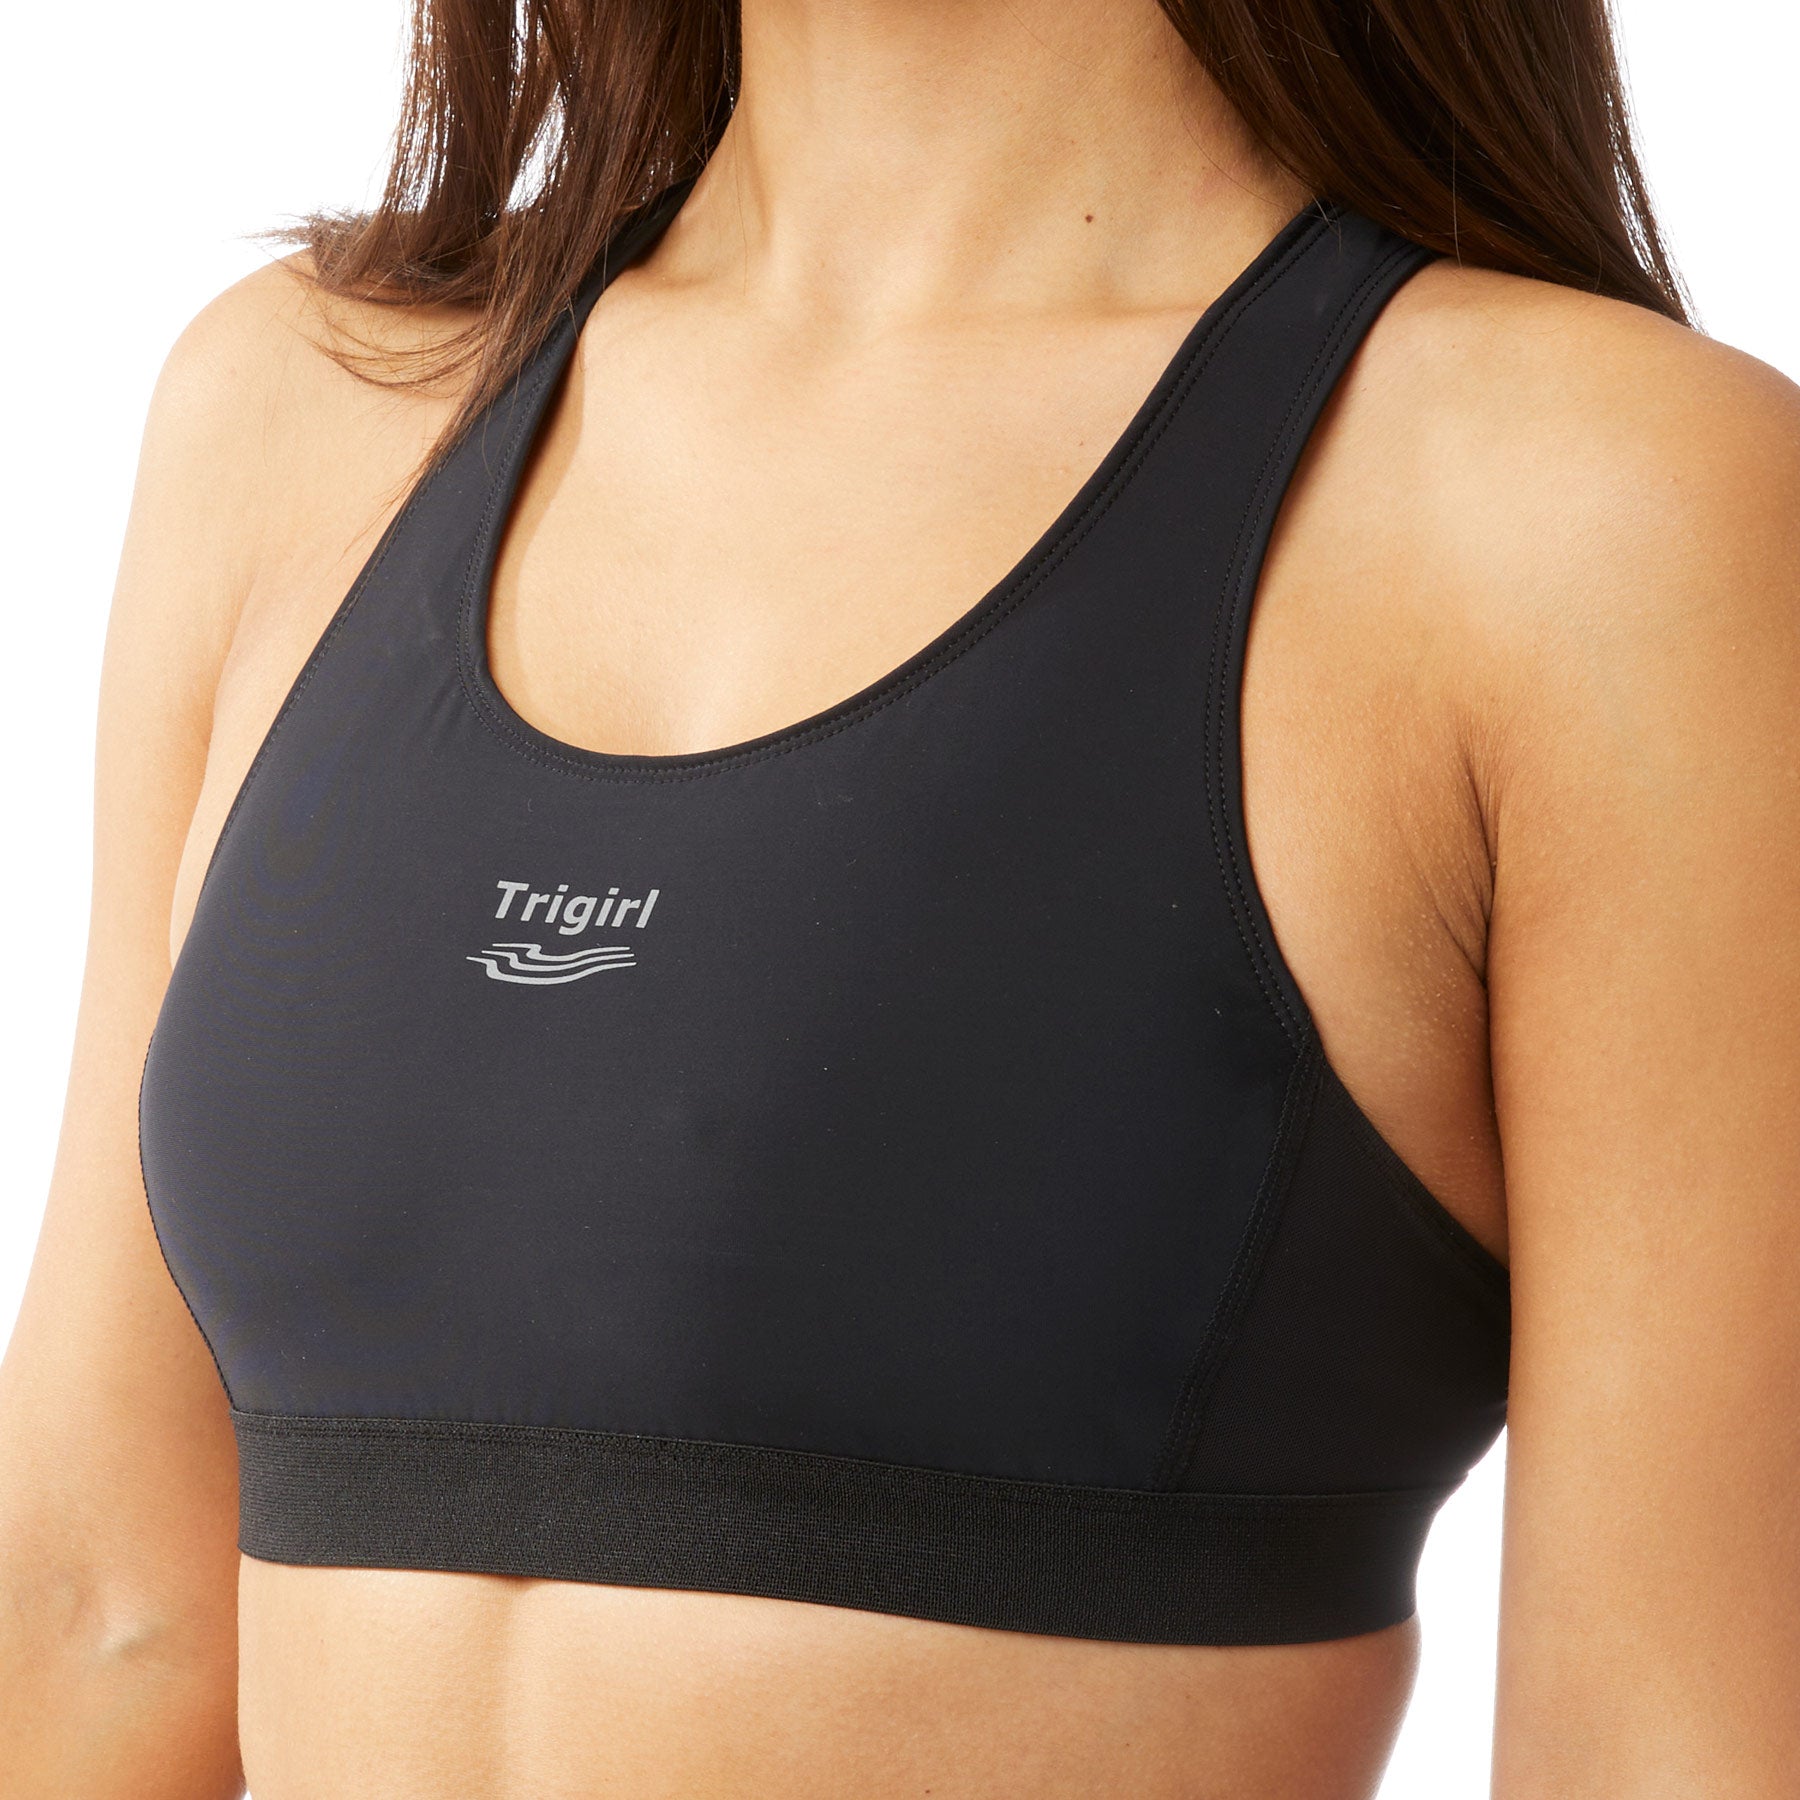 Funky Triathlon Top with Support Bra, Water Drops